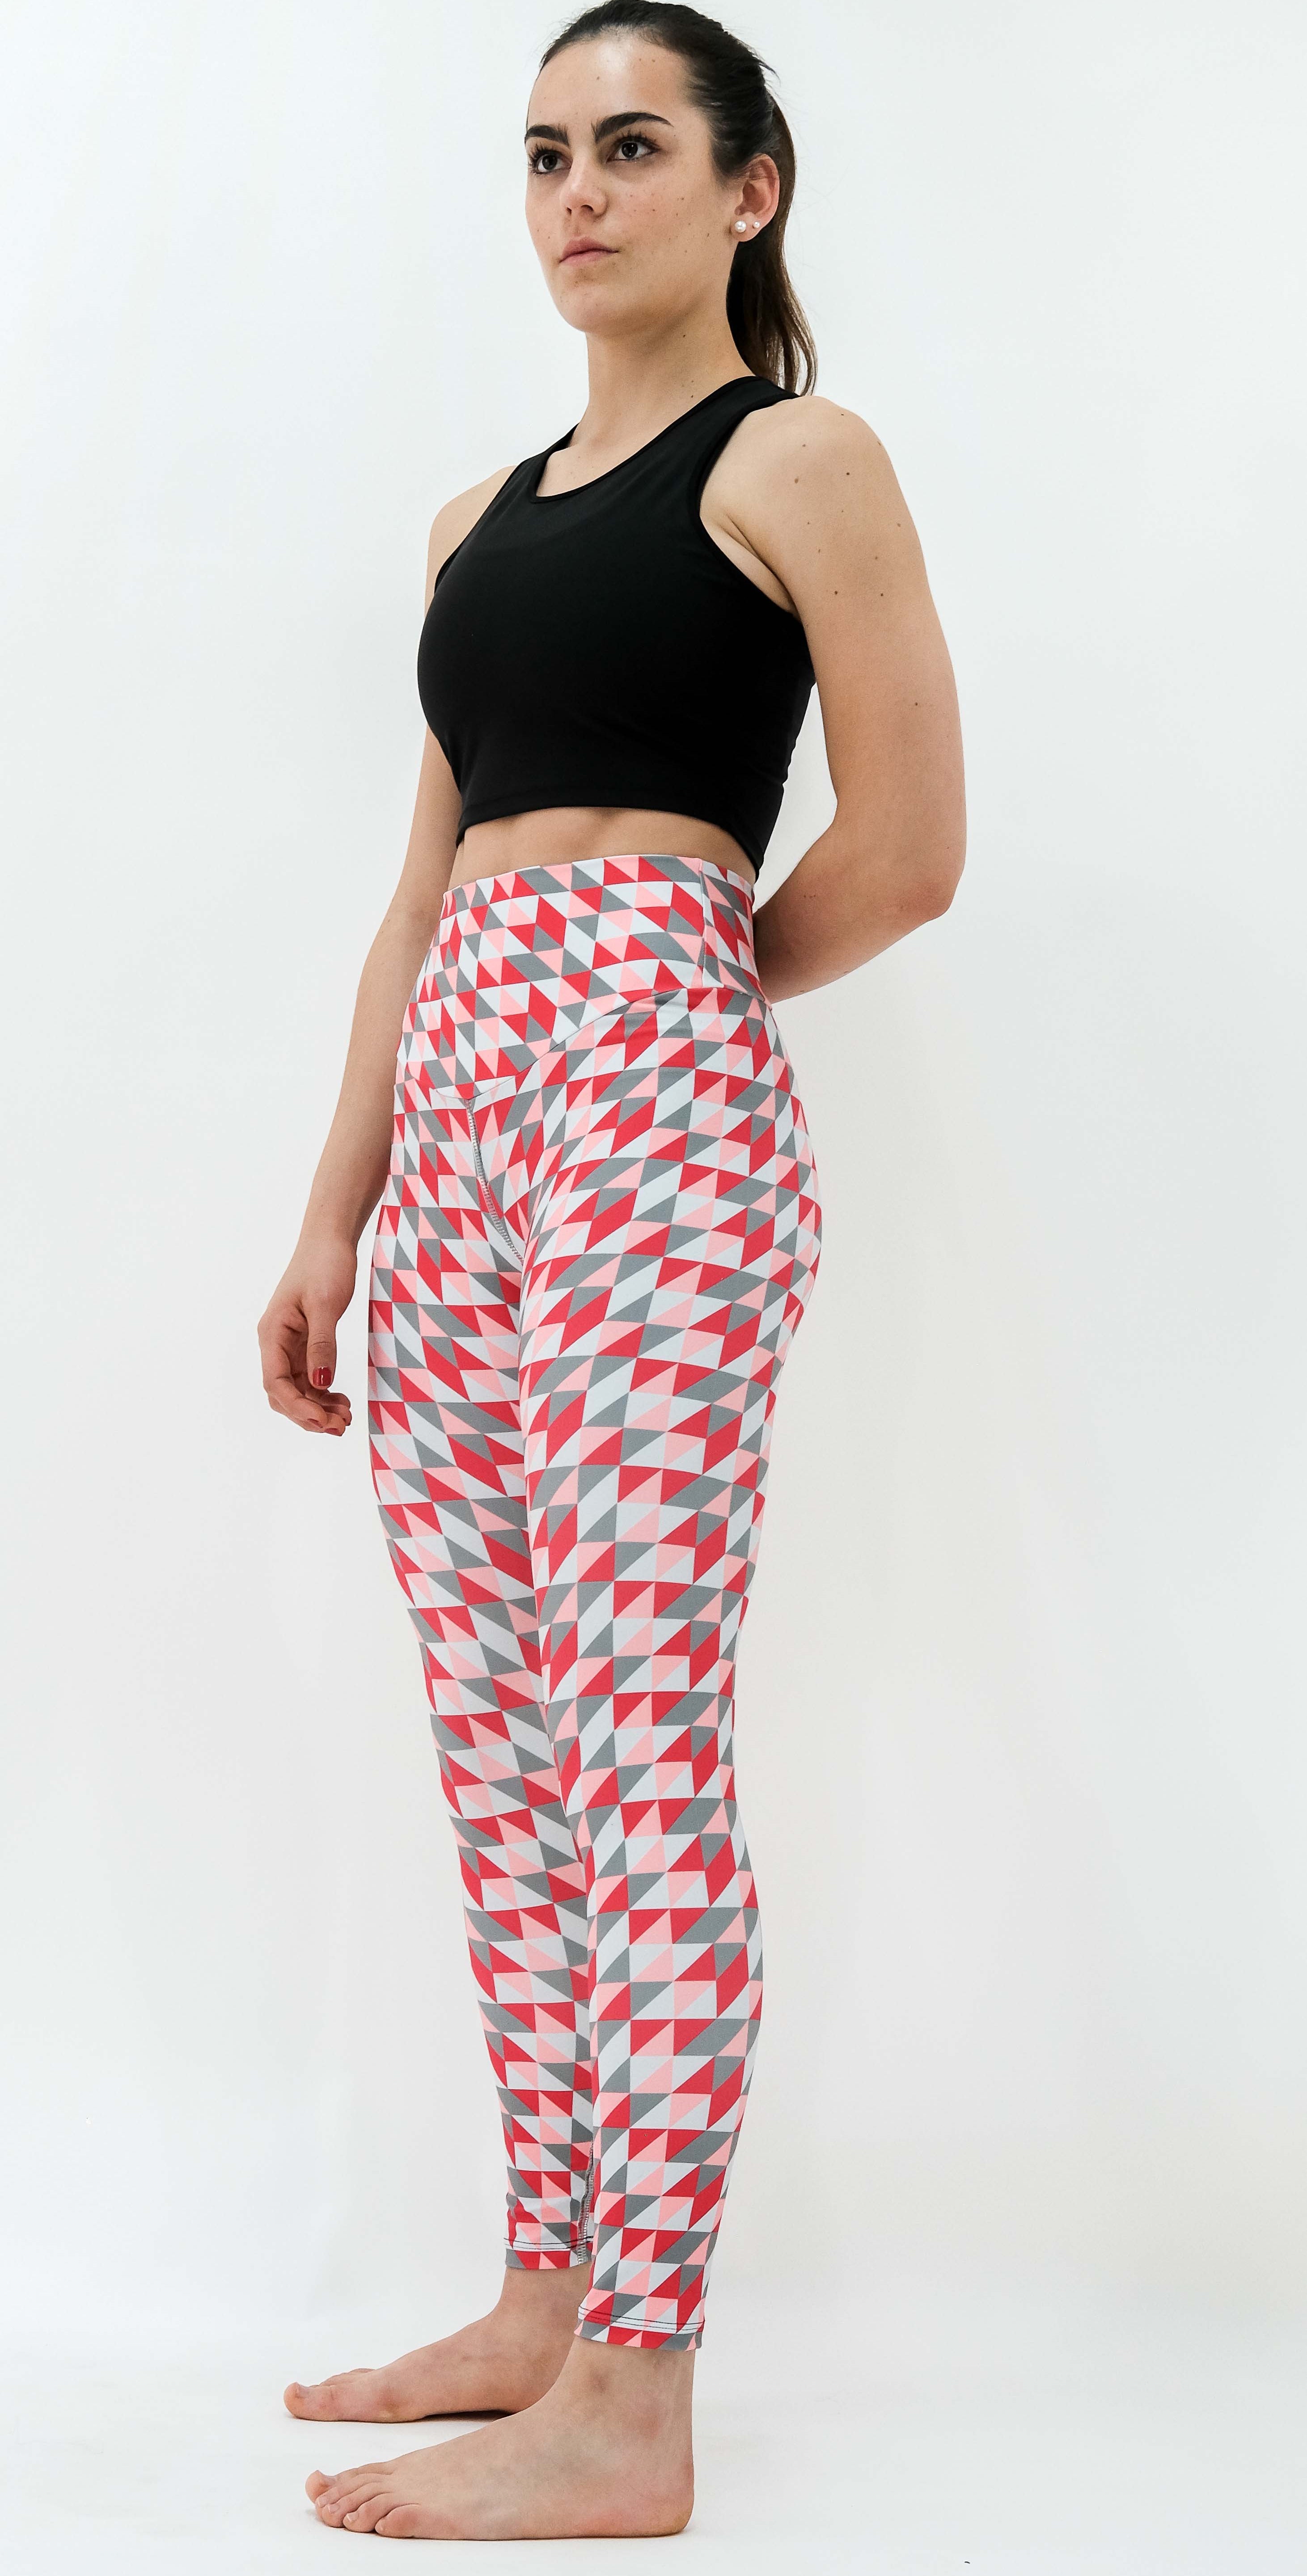 Legging Woman Recycled Triangles